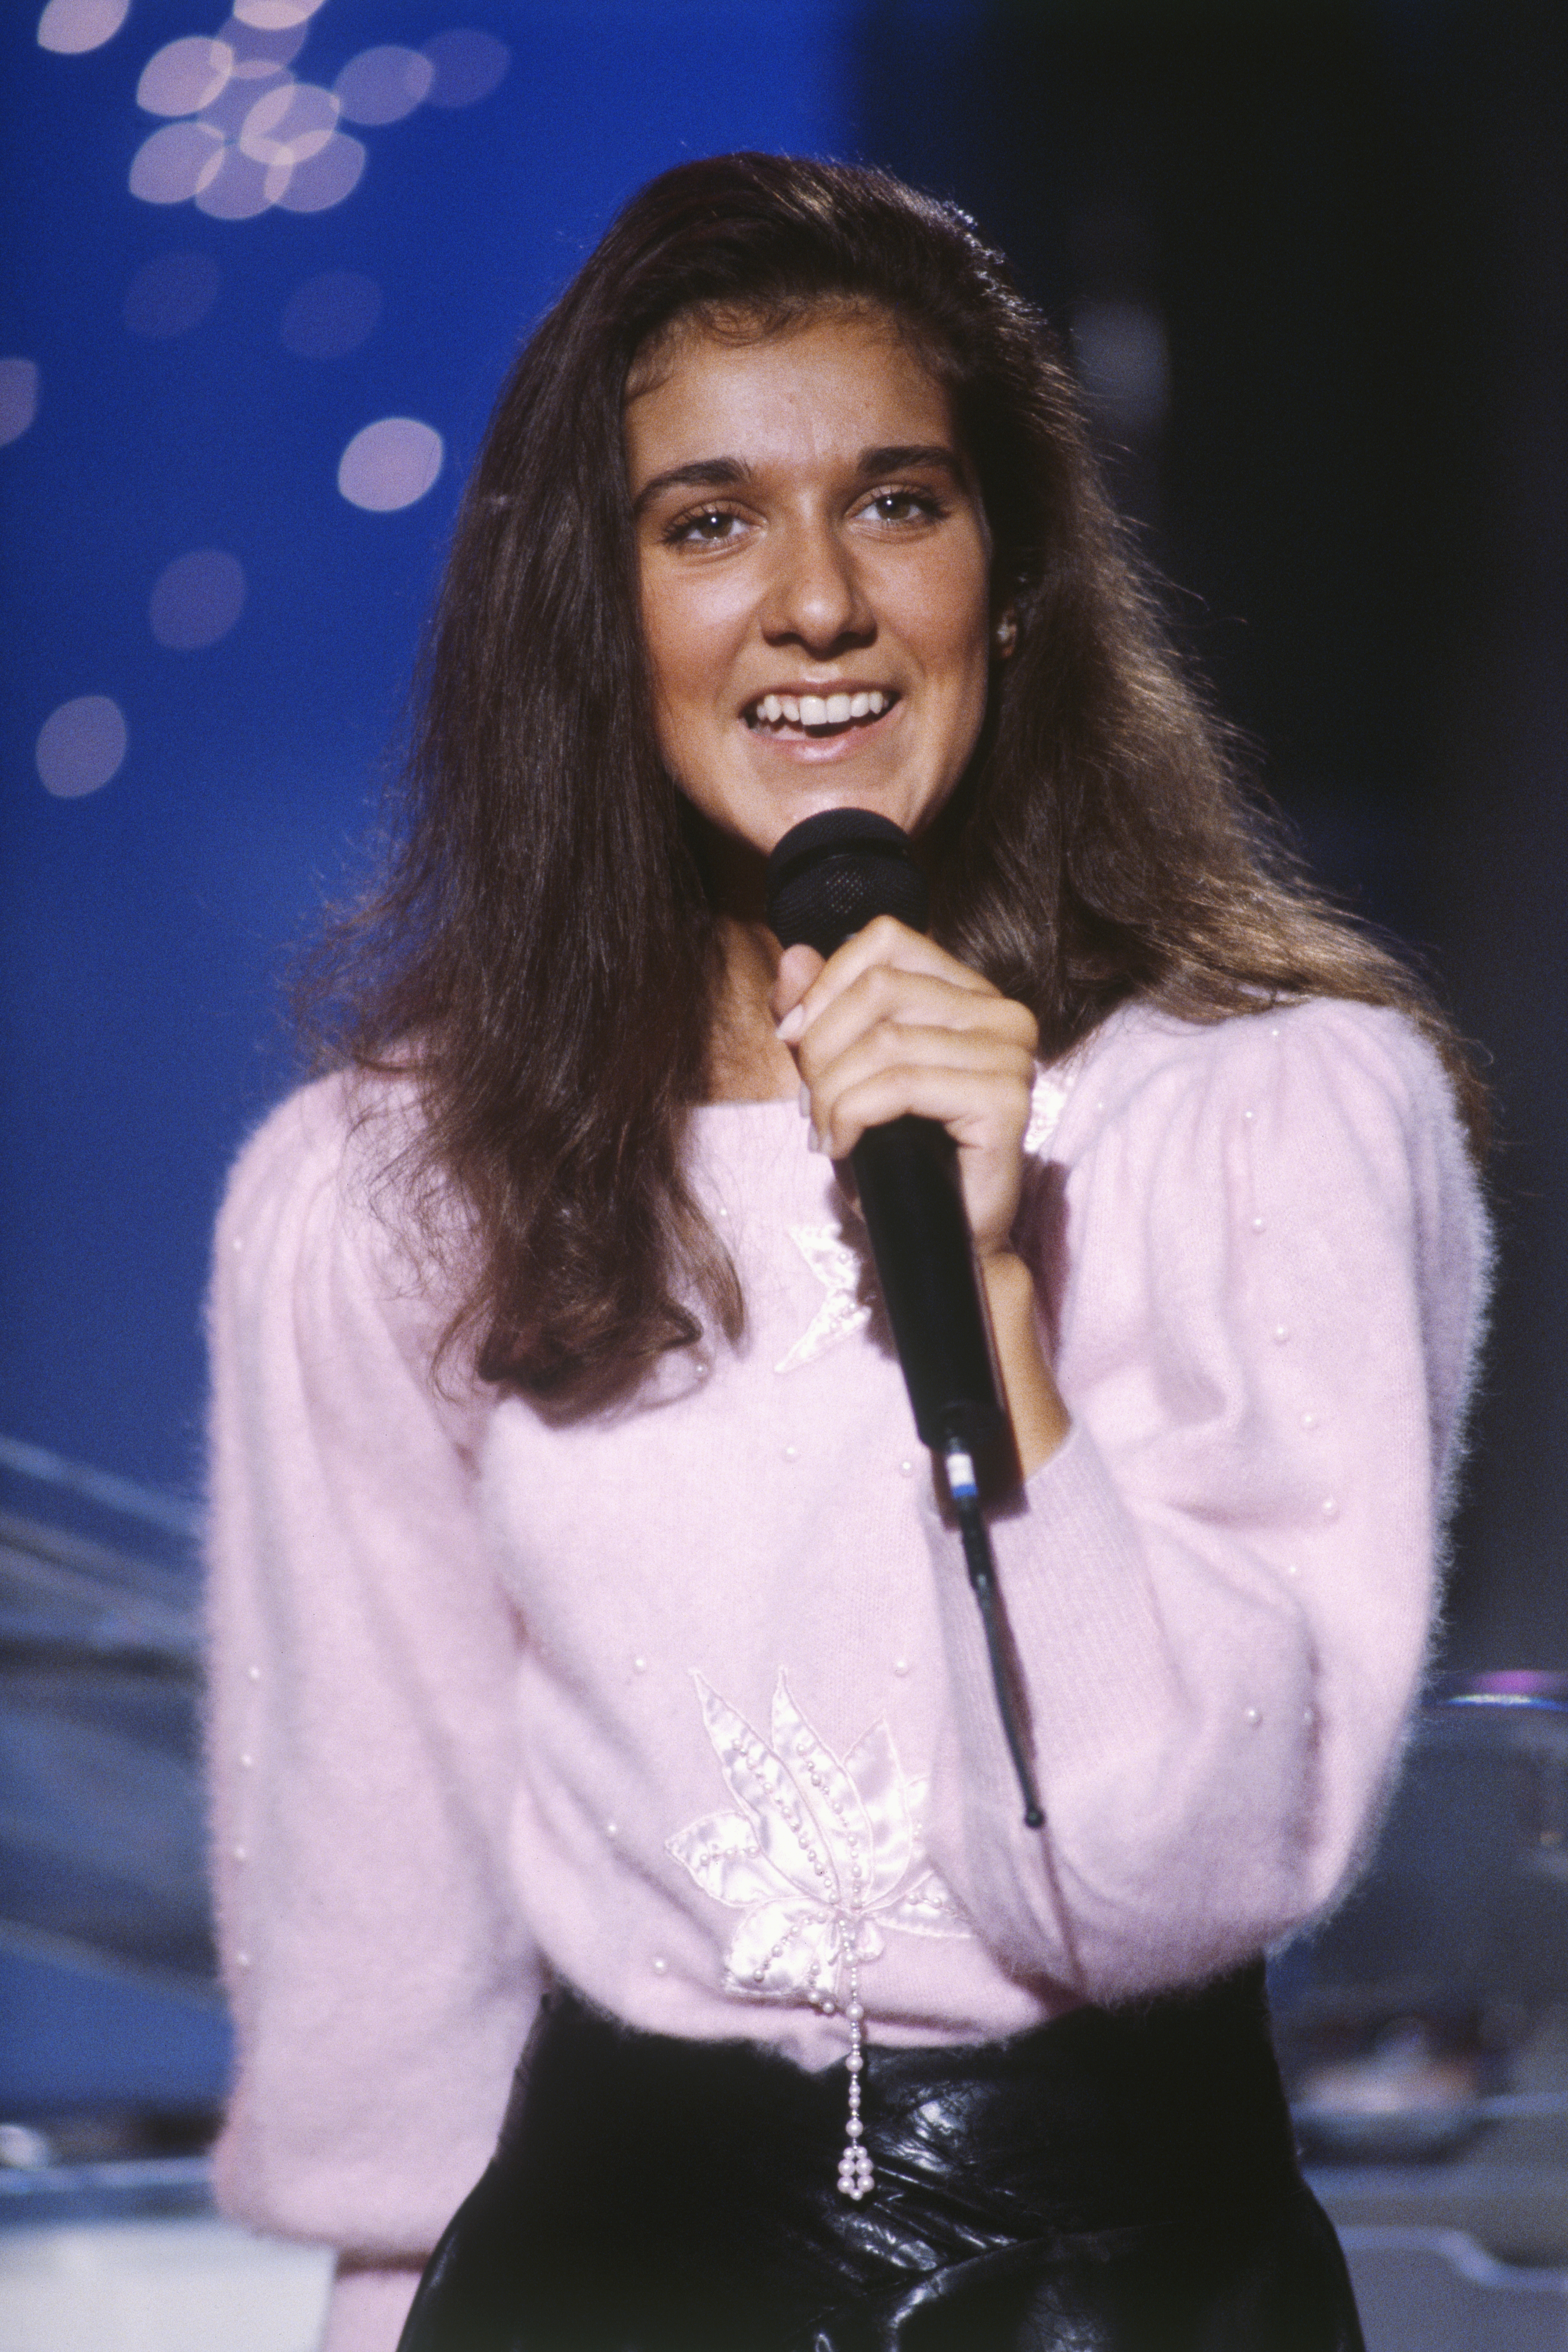 Celine Dion photographed in 1985 | Source: Getty Images